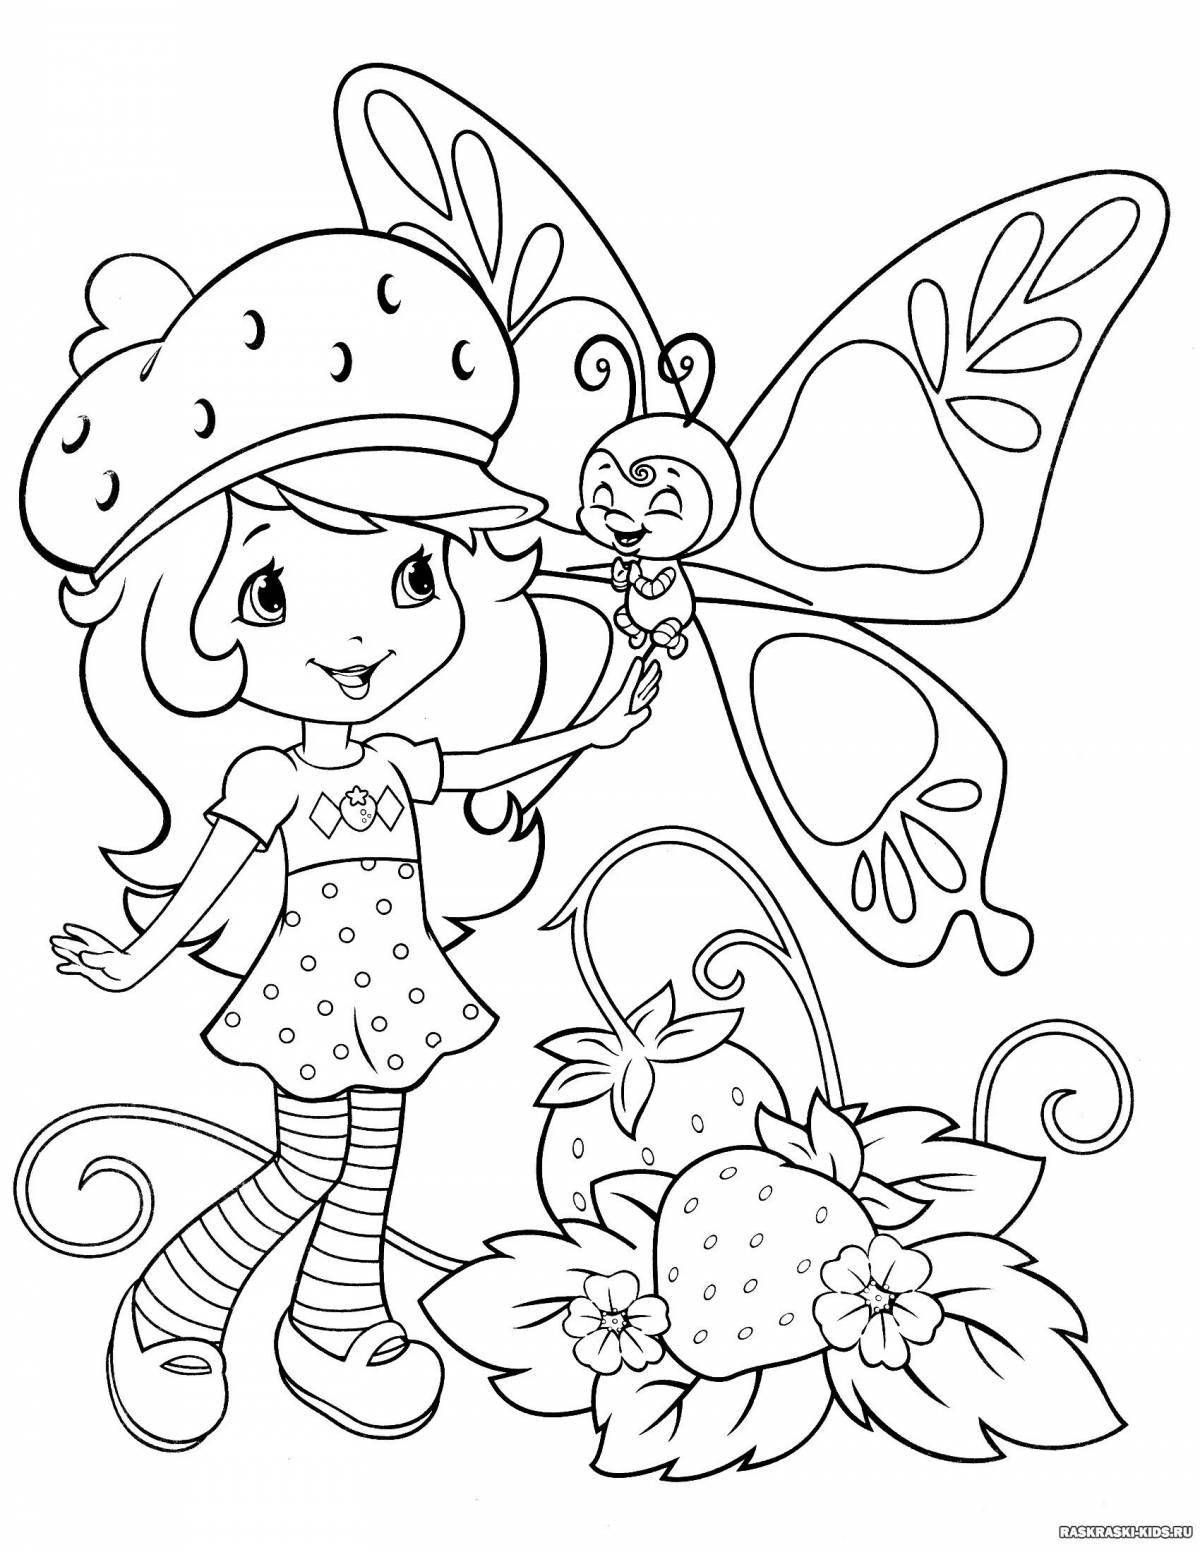 Coloring book for girls 6 years old